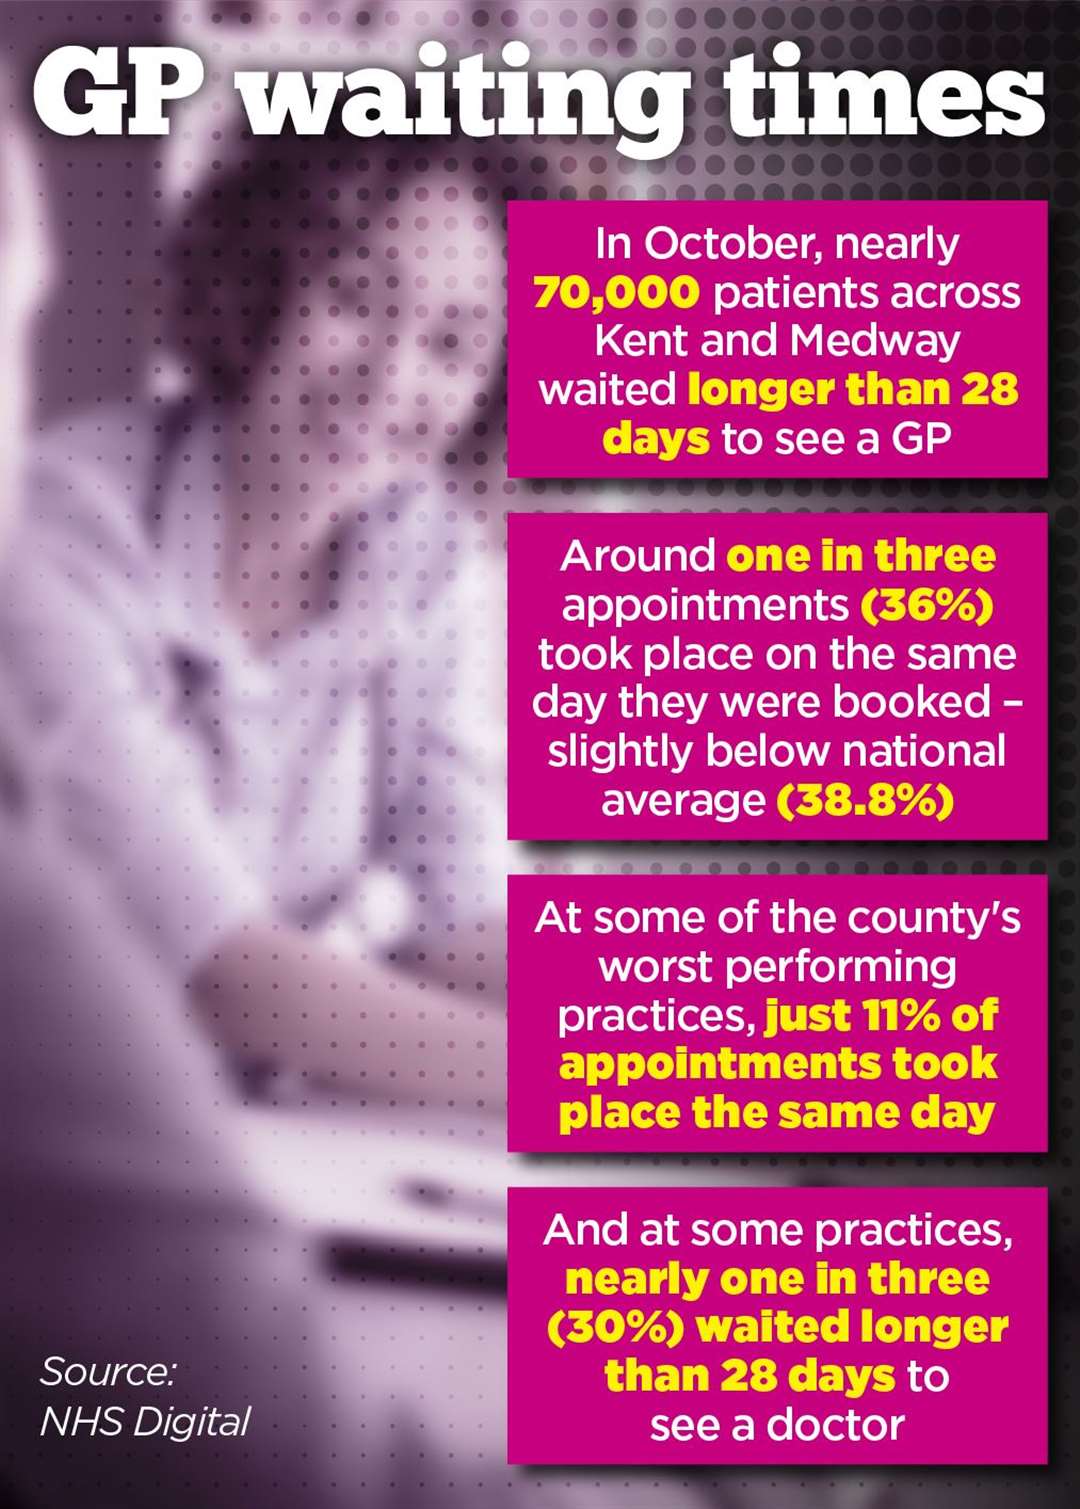 Nearly 70,000 waited longer than 28 days to see their GP in October 2022 according to NHS Digital statistics.